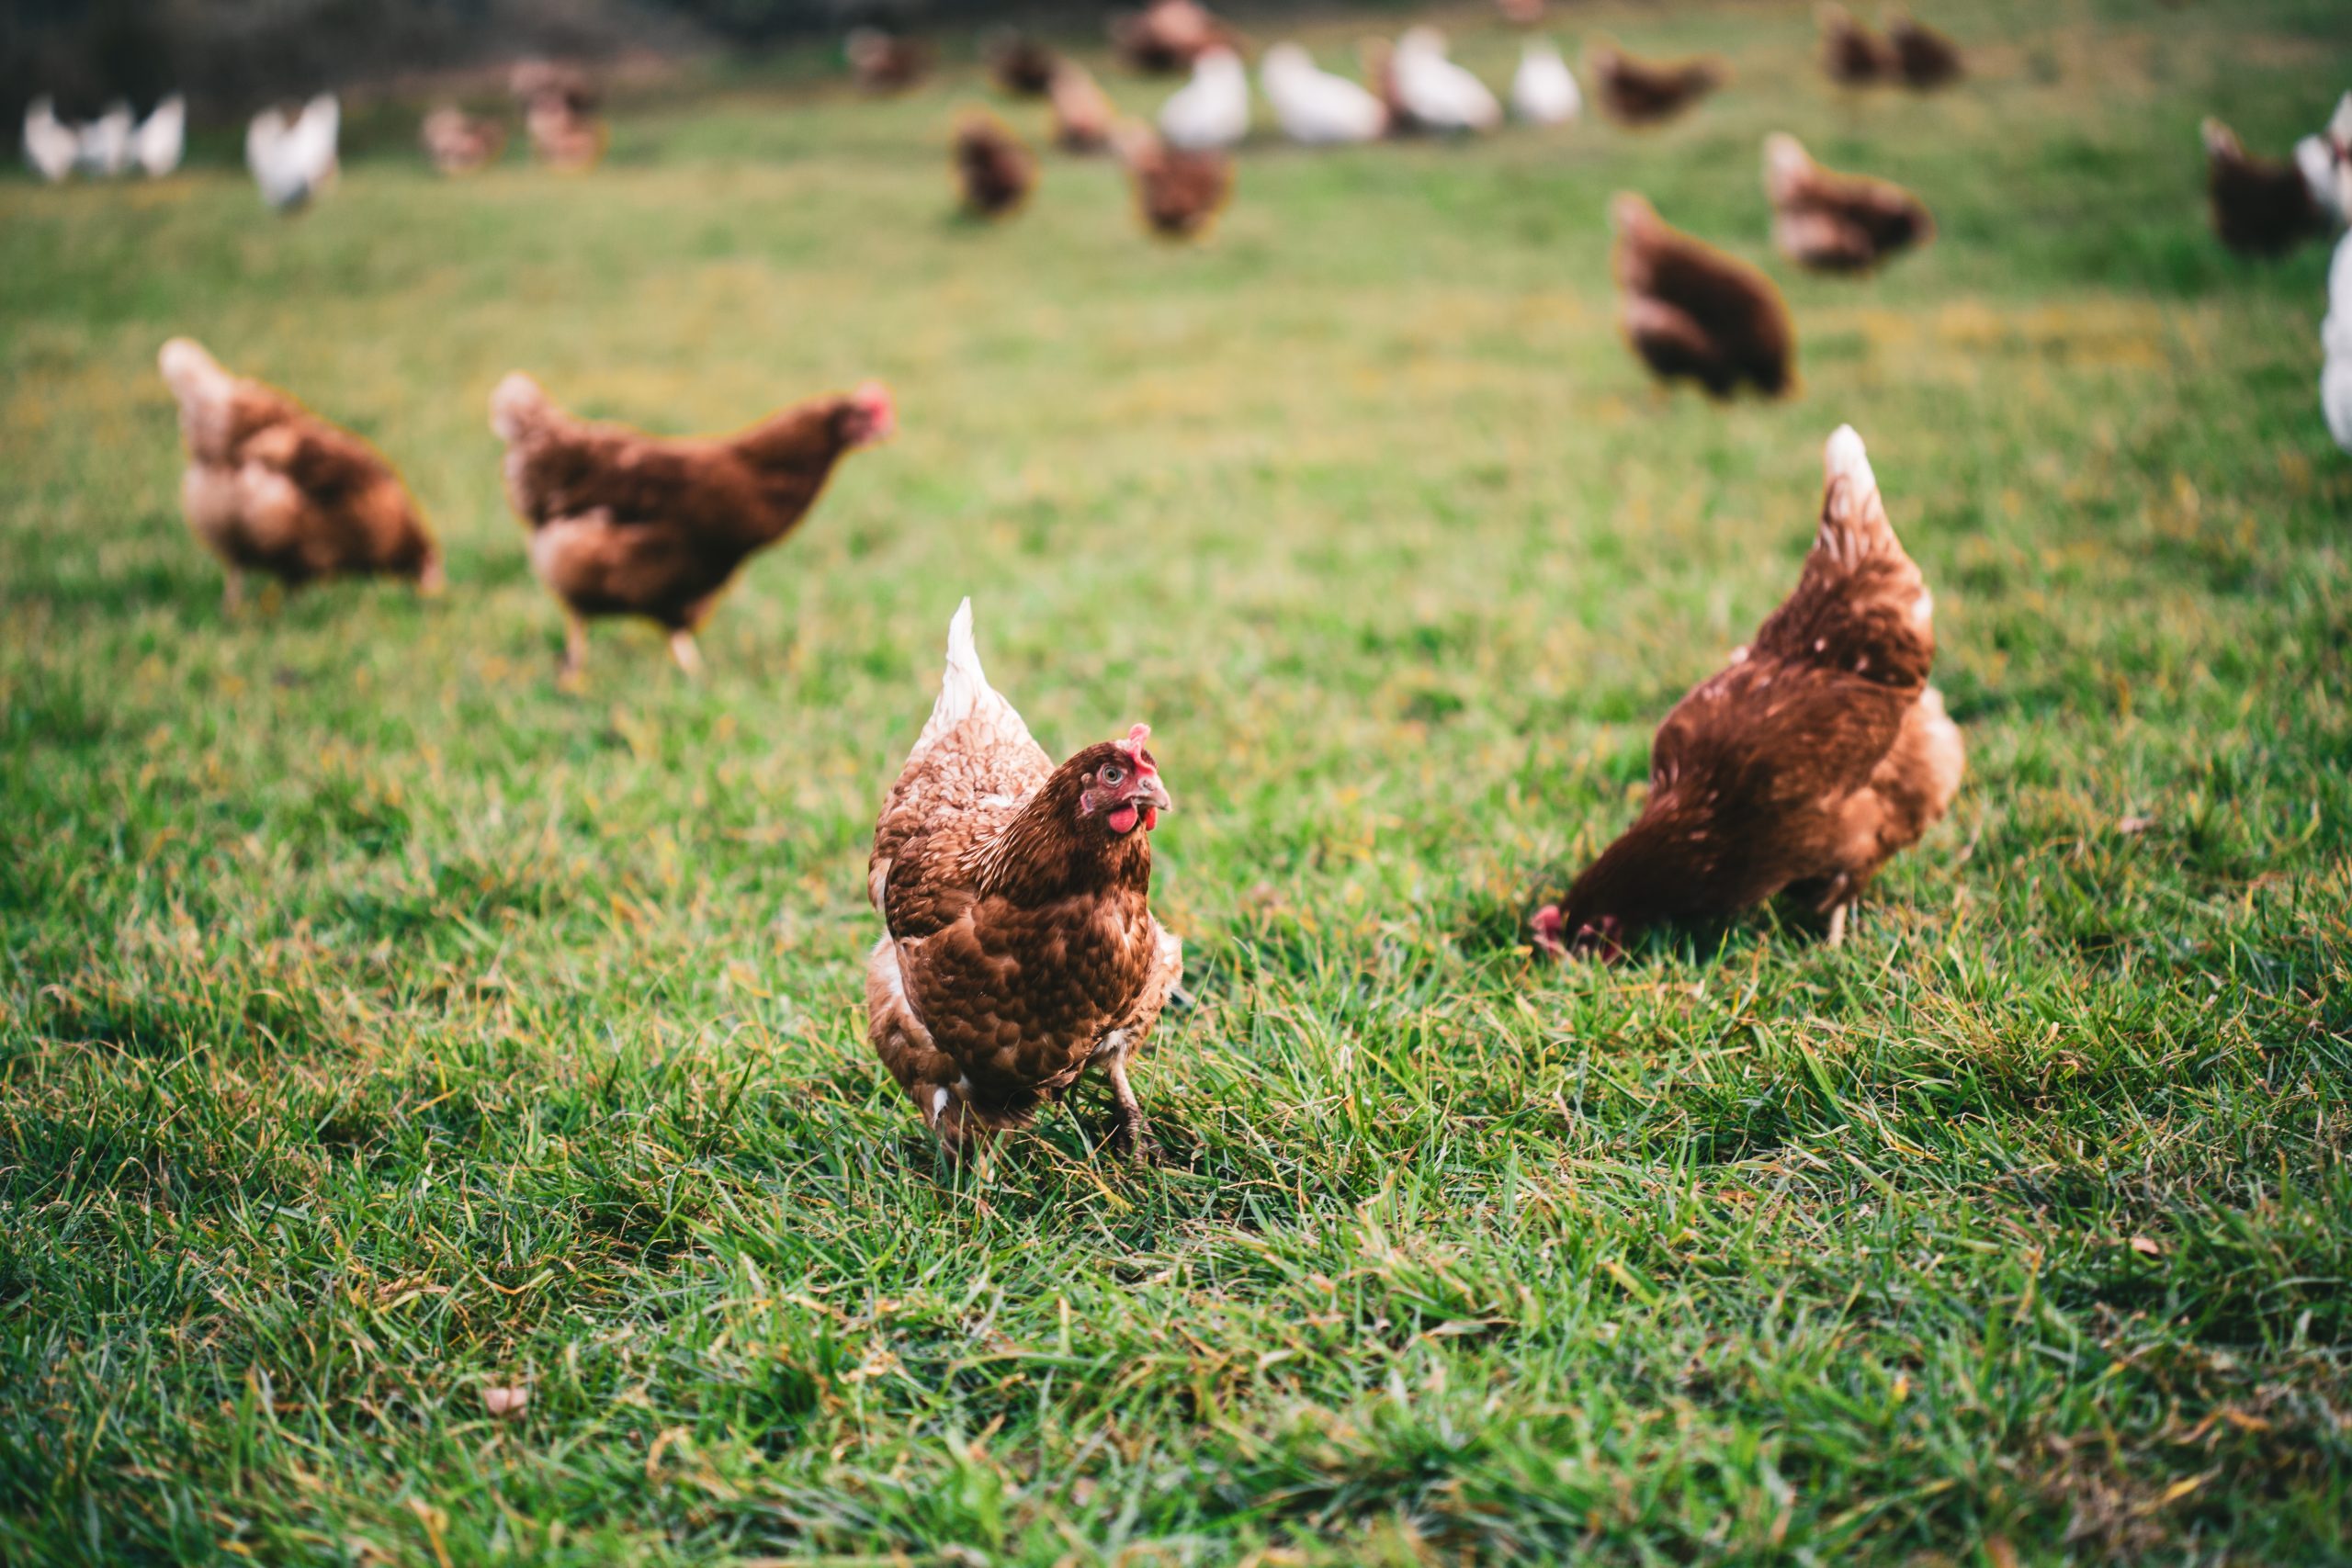 A beautiful shot of chickens on the grass in the farm on a sunny day